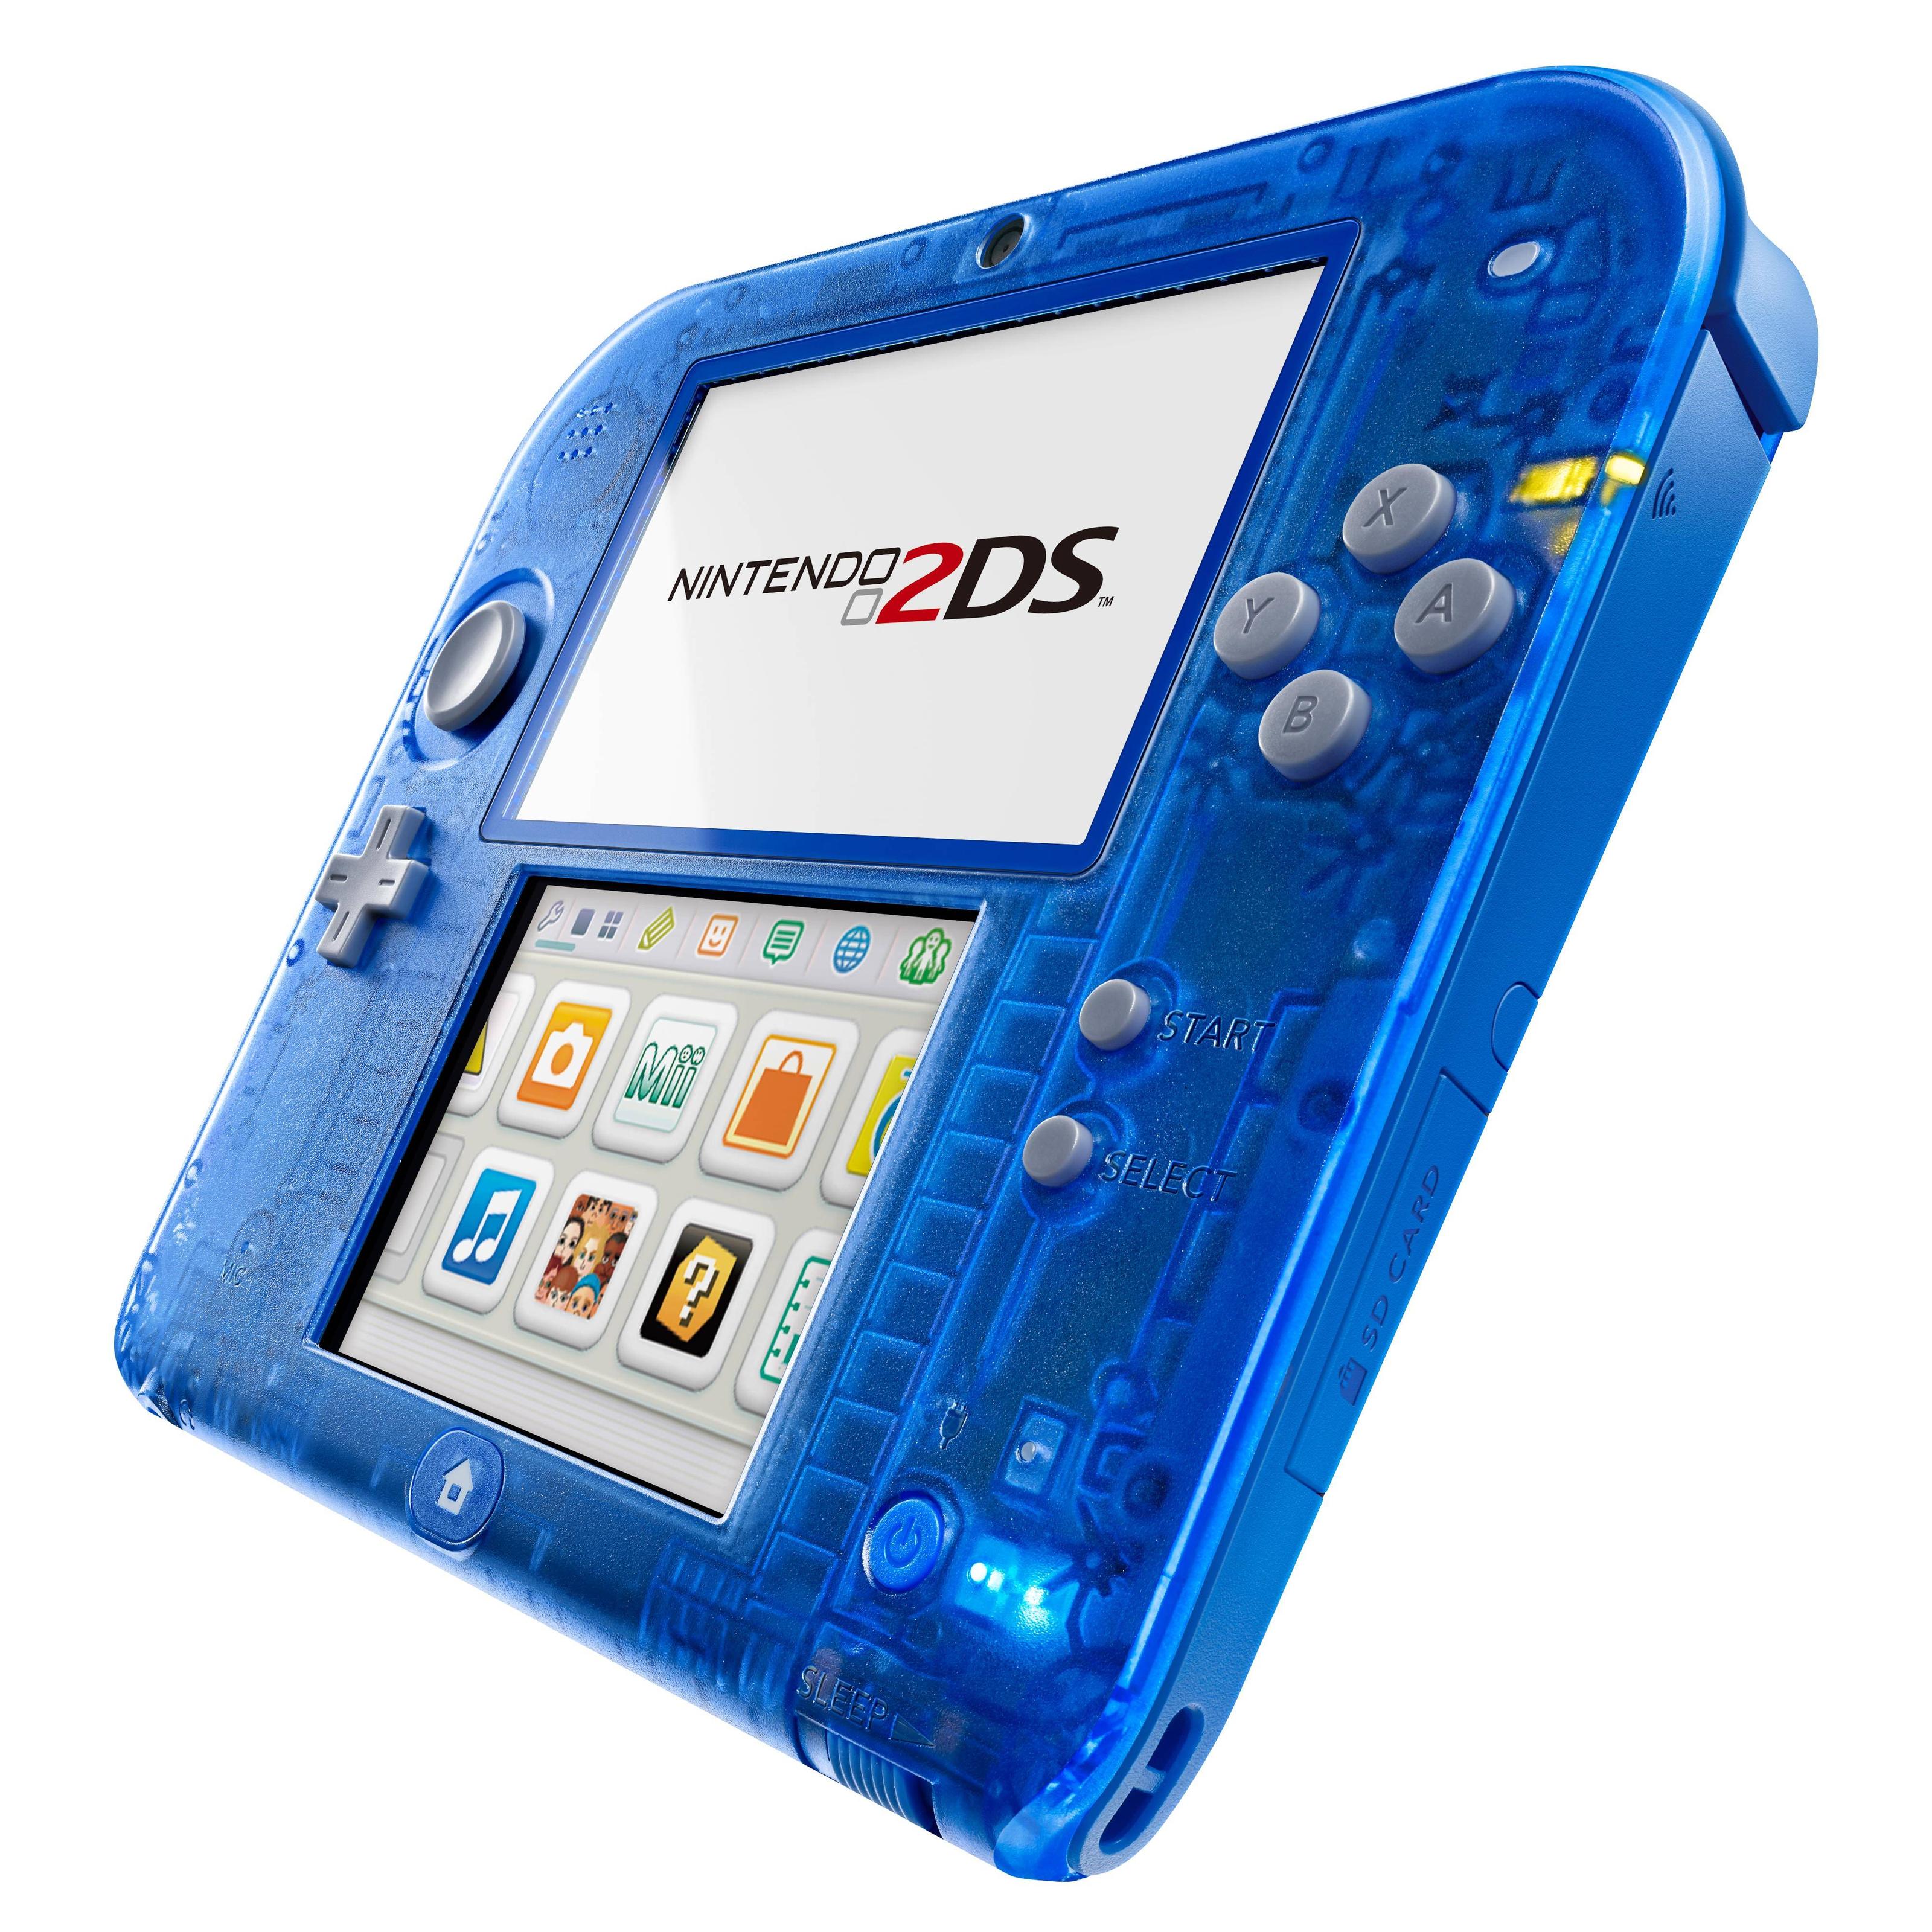 Transparent 2DS and Pokemon Bundles are Coming to Europe